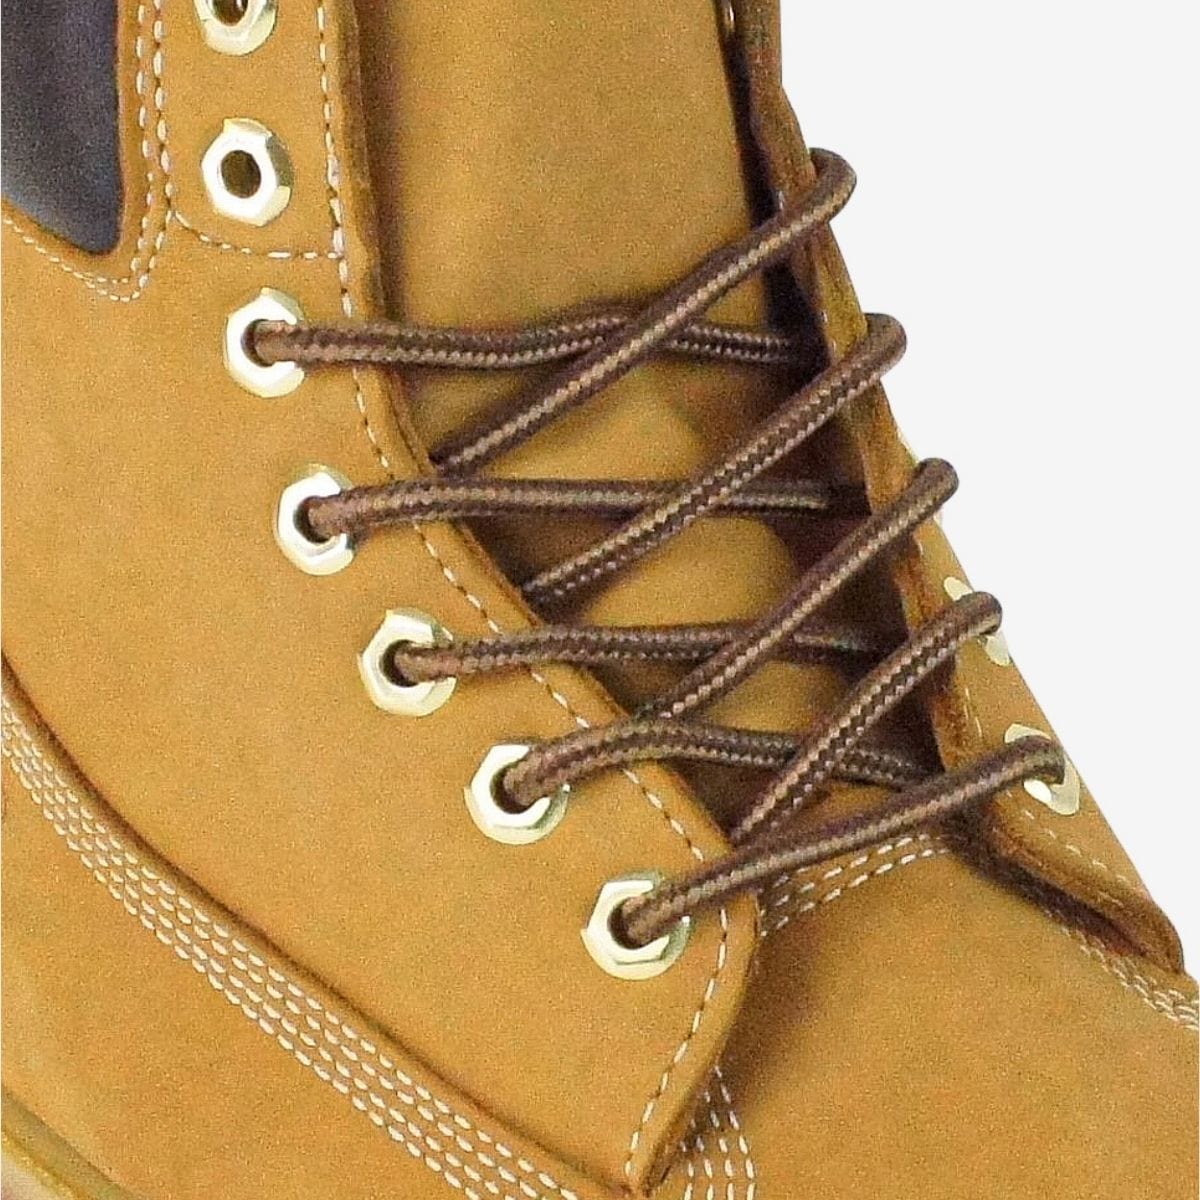 shop-round-shoelaces-online-in-light-brown-and-brown-for-boots-sneakers-and-running-shoes